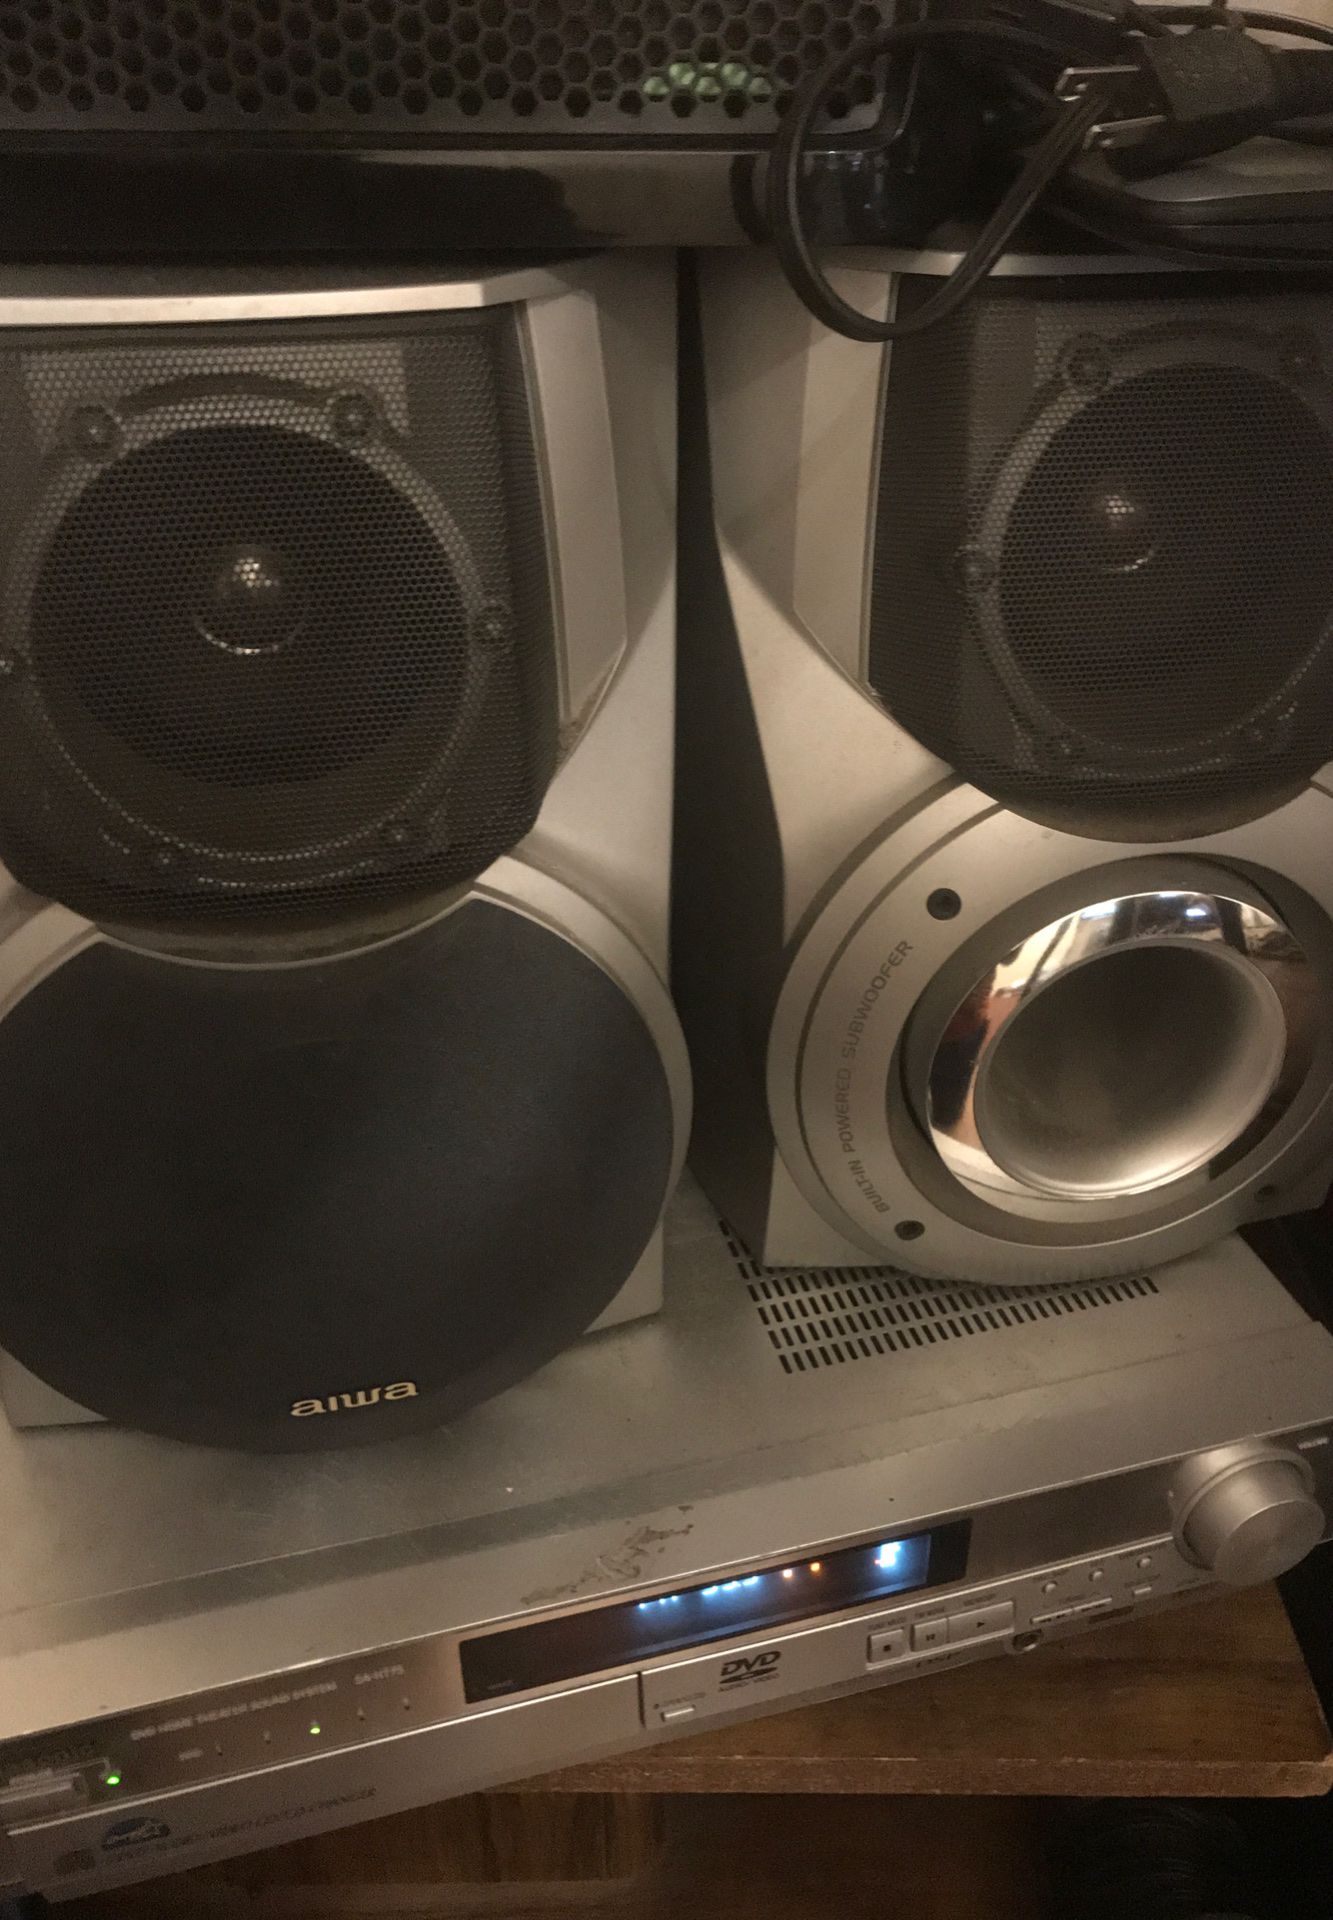 Speakers and dvd house sound system